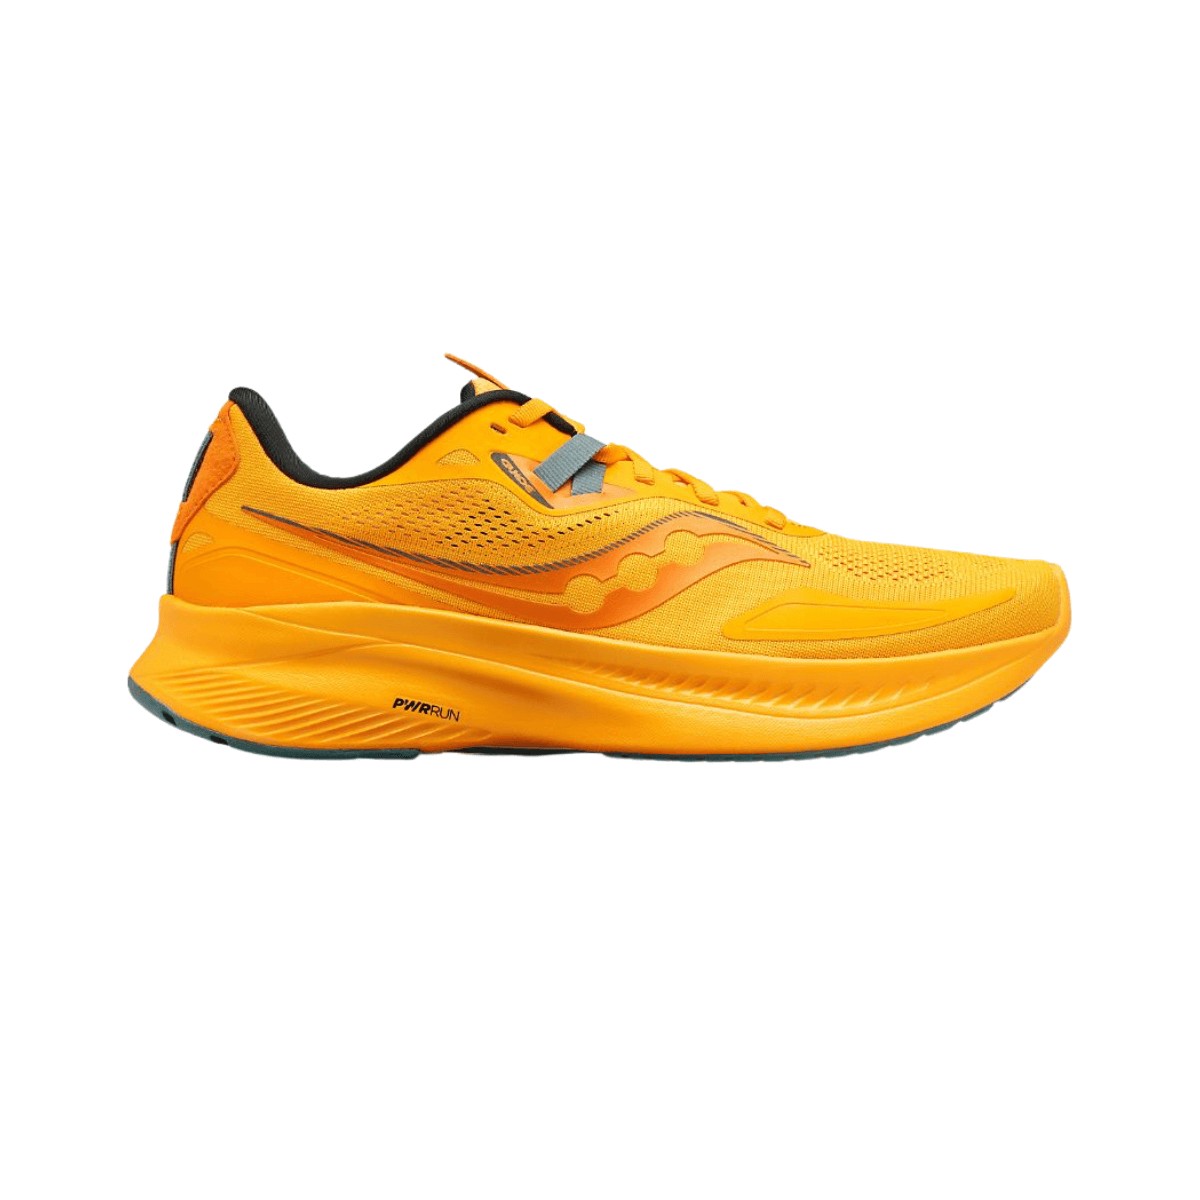 Chaussures Saucony Guide 15 Orange AW22, Taille 41 - EUR